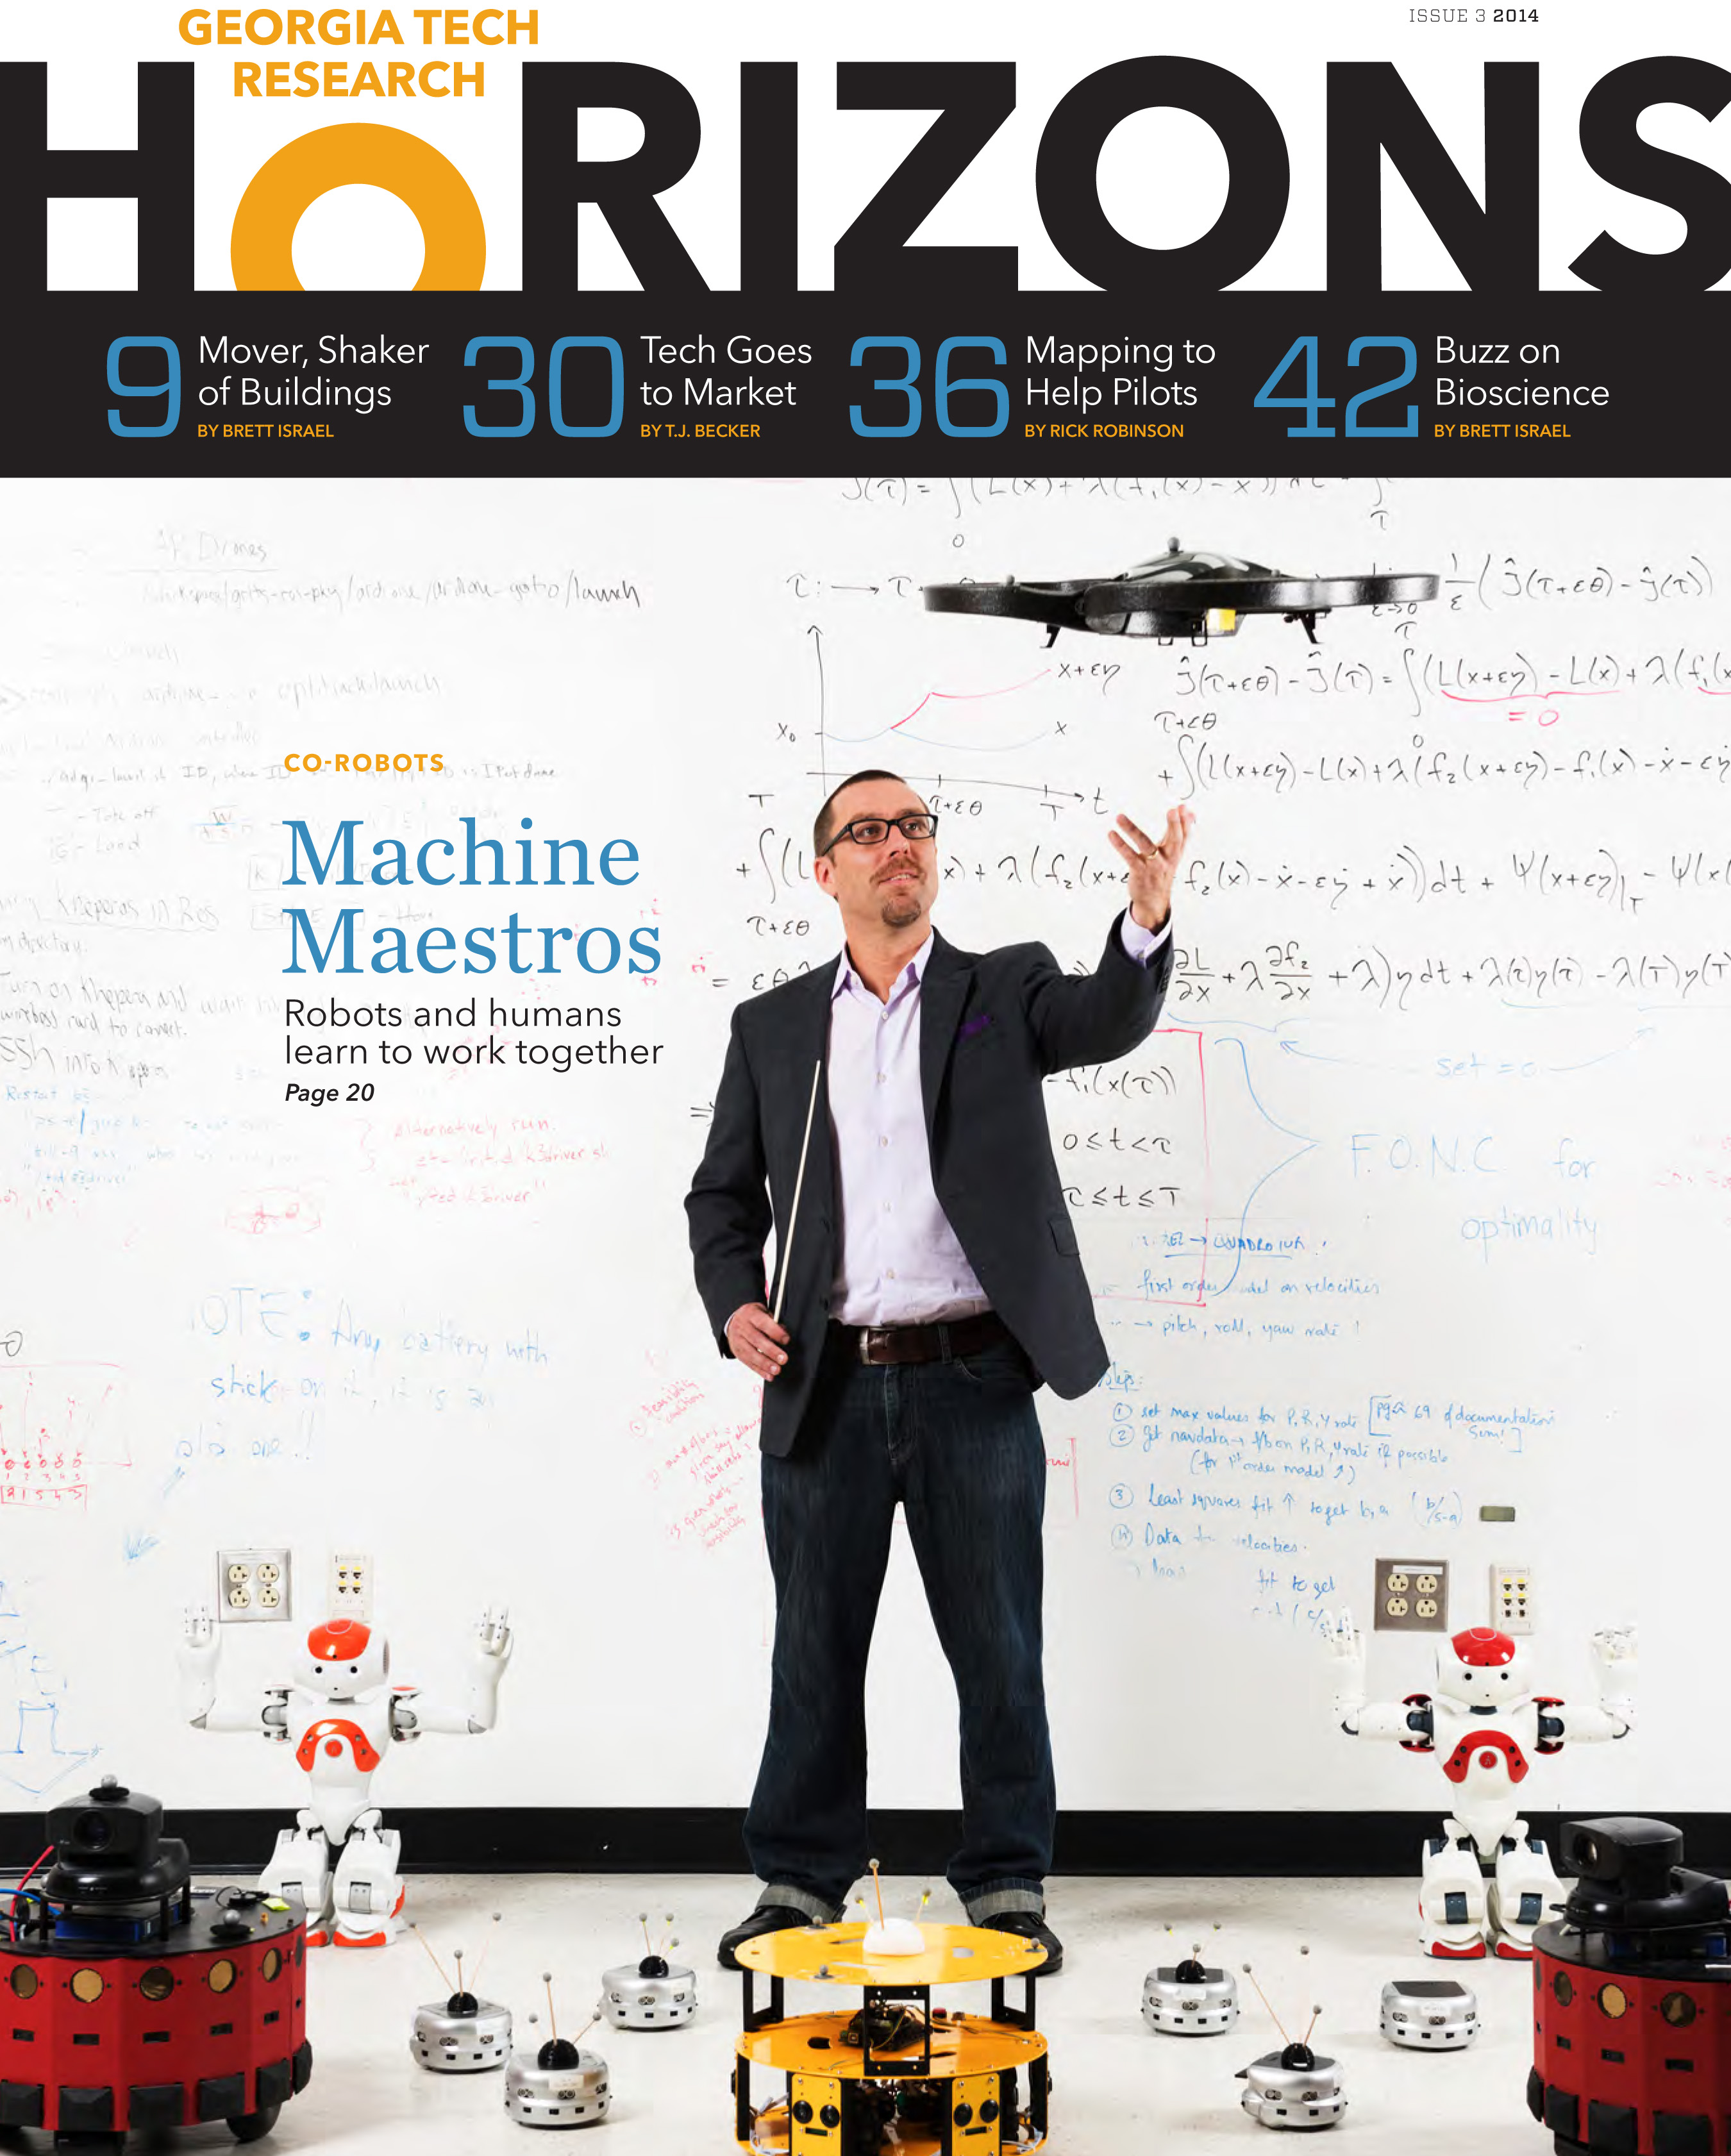 The cover of the new Research Horizons magazine features Prof. Magnus Egerstedt, who is developing techniques for controlling swarms of robots.